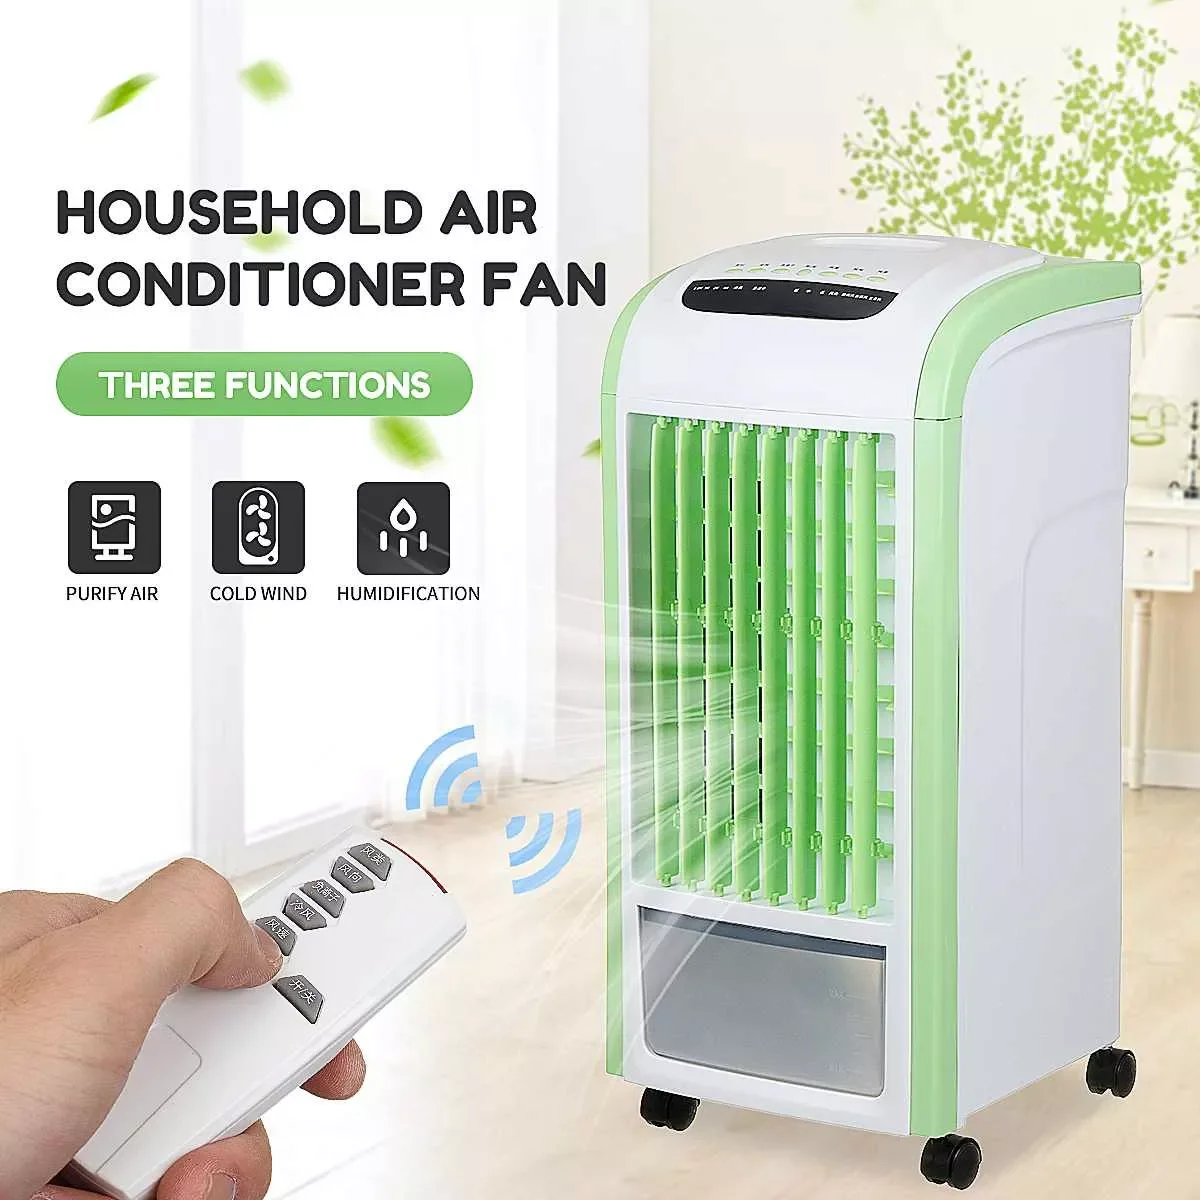 Enlarge 220V 60W Portable Air Conditioner Conditioning Fan Humidifier Cooler Remote Control Air Conditioner Cooling Fan+5 Ice Crystal